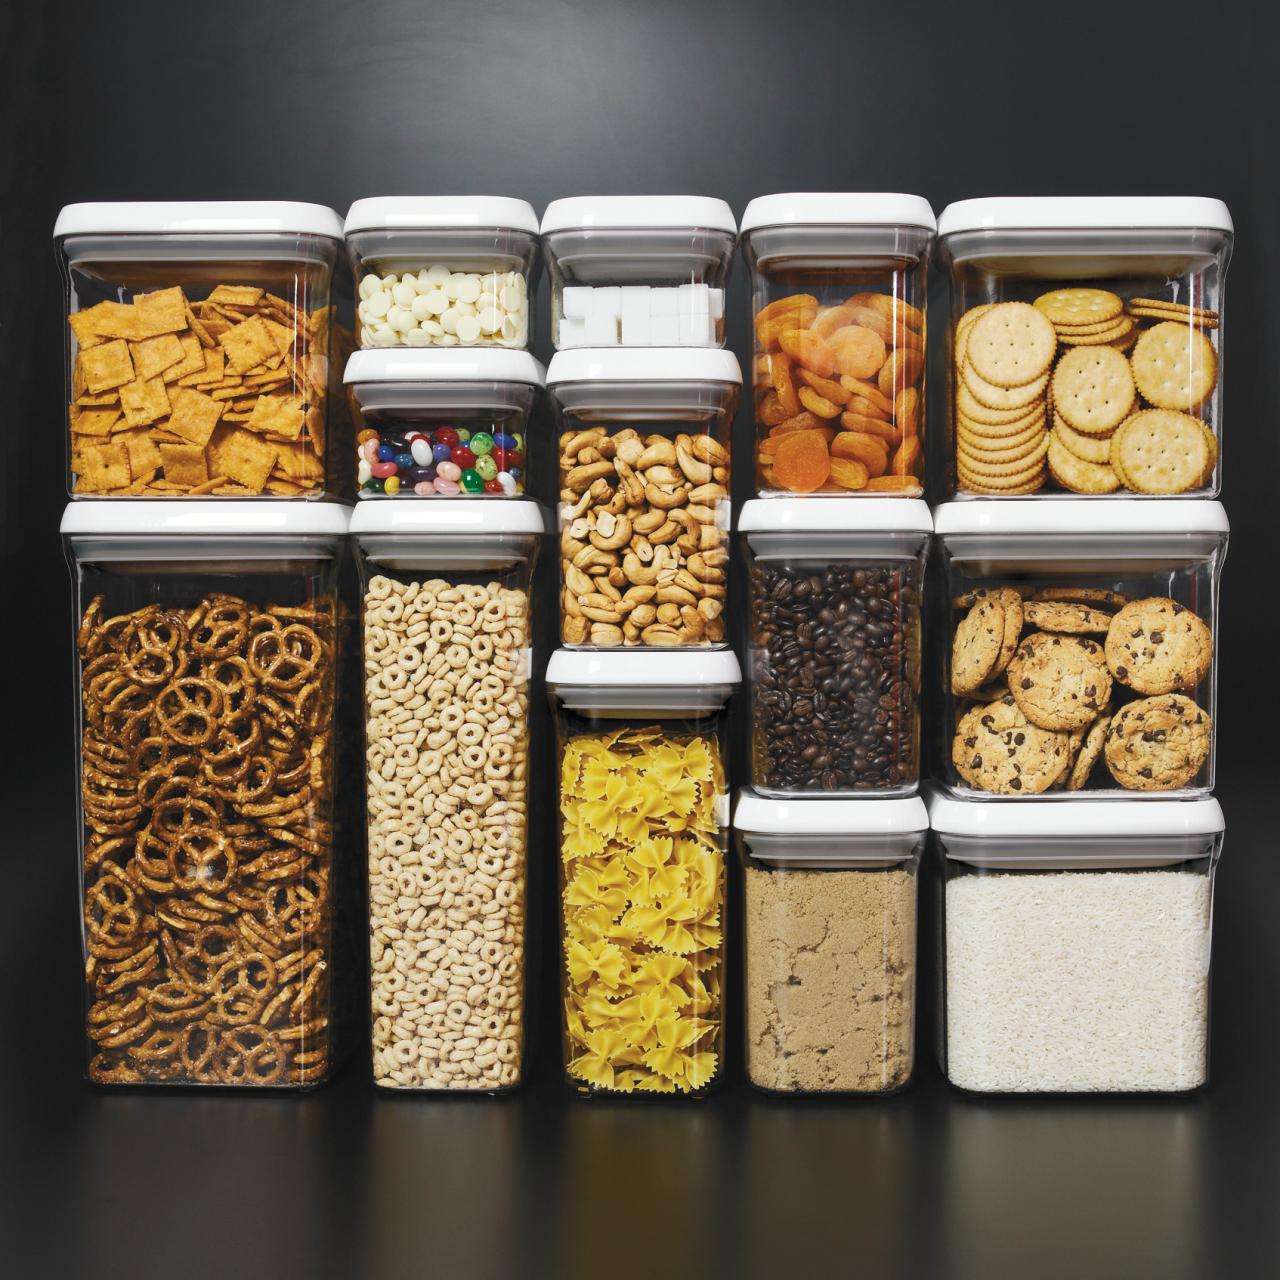 How to Organize Food Storage Containers